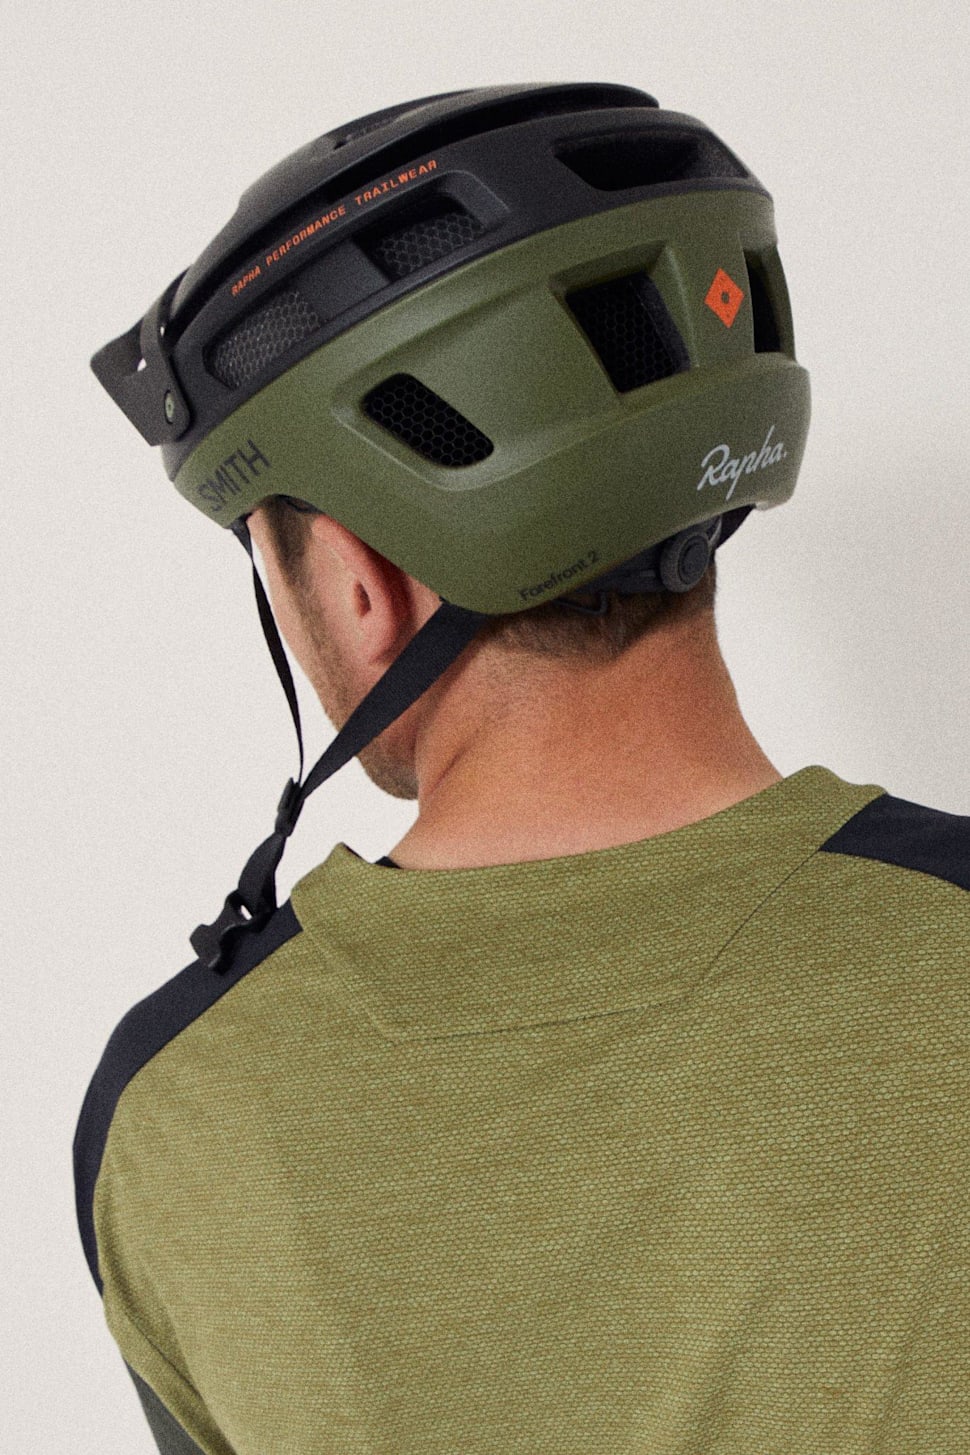 Rapha MTB x Smith Forefront 2 Trail Helm (US/ASIA) | Rapha